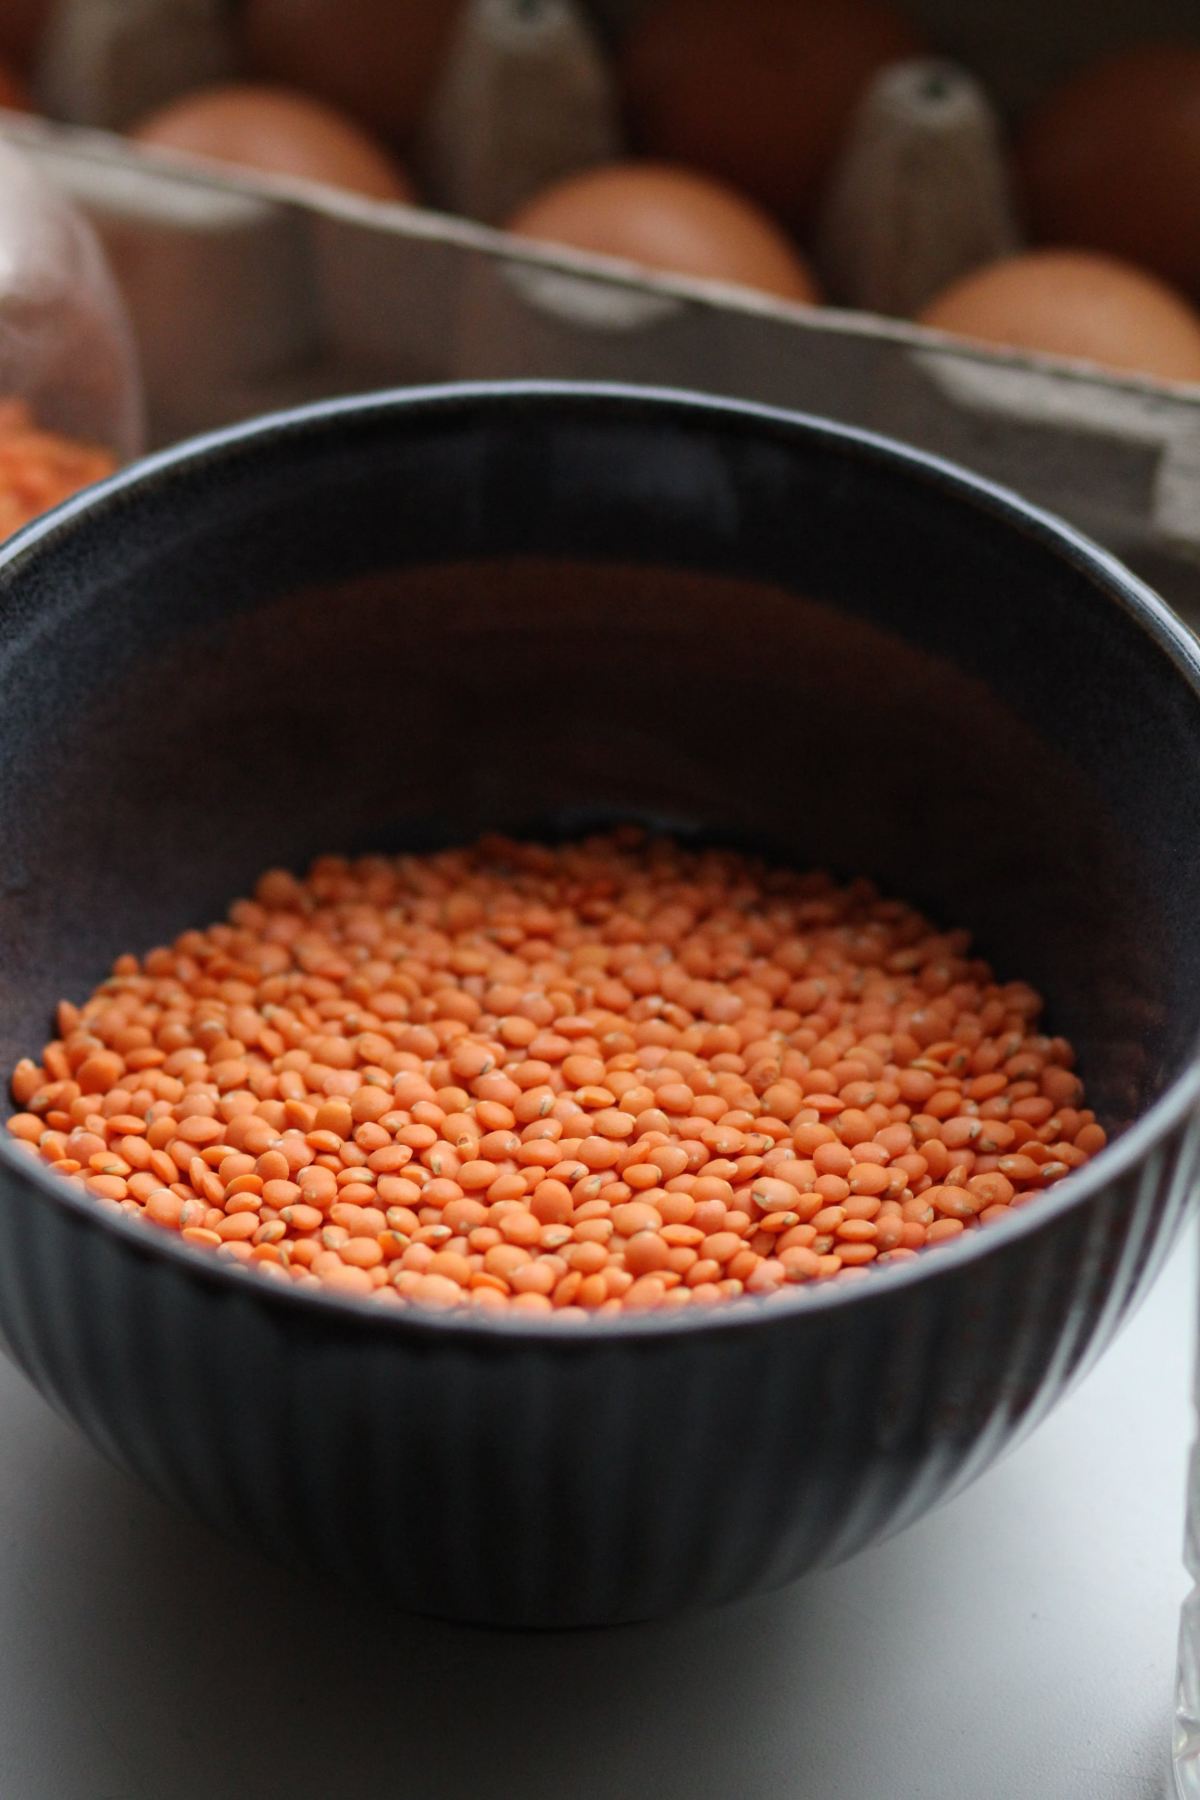 uncooked red lentils in a bowl